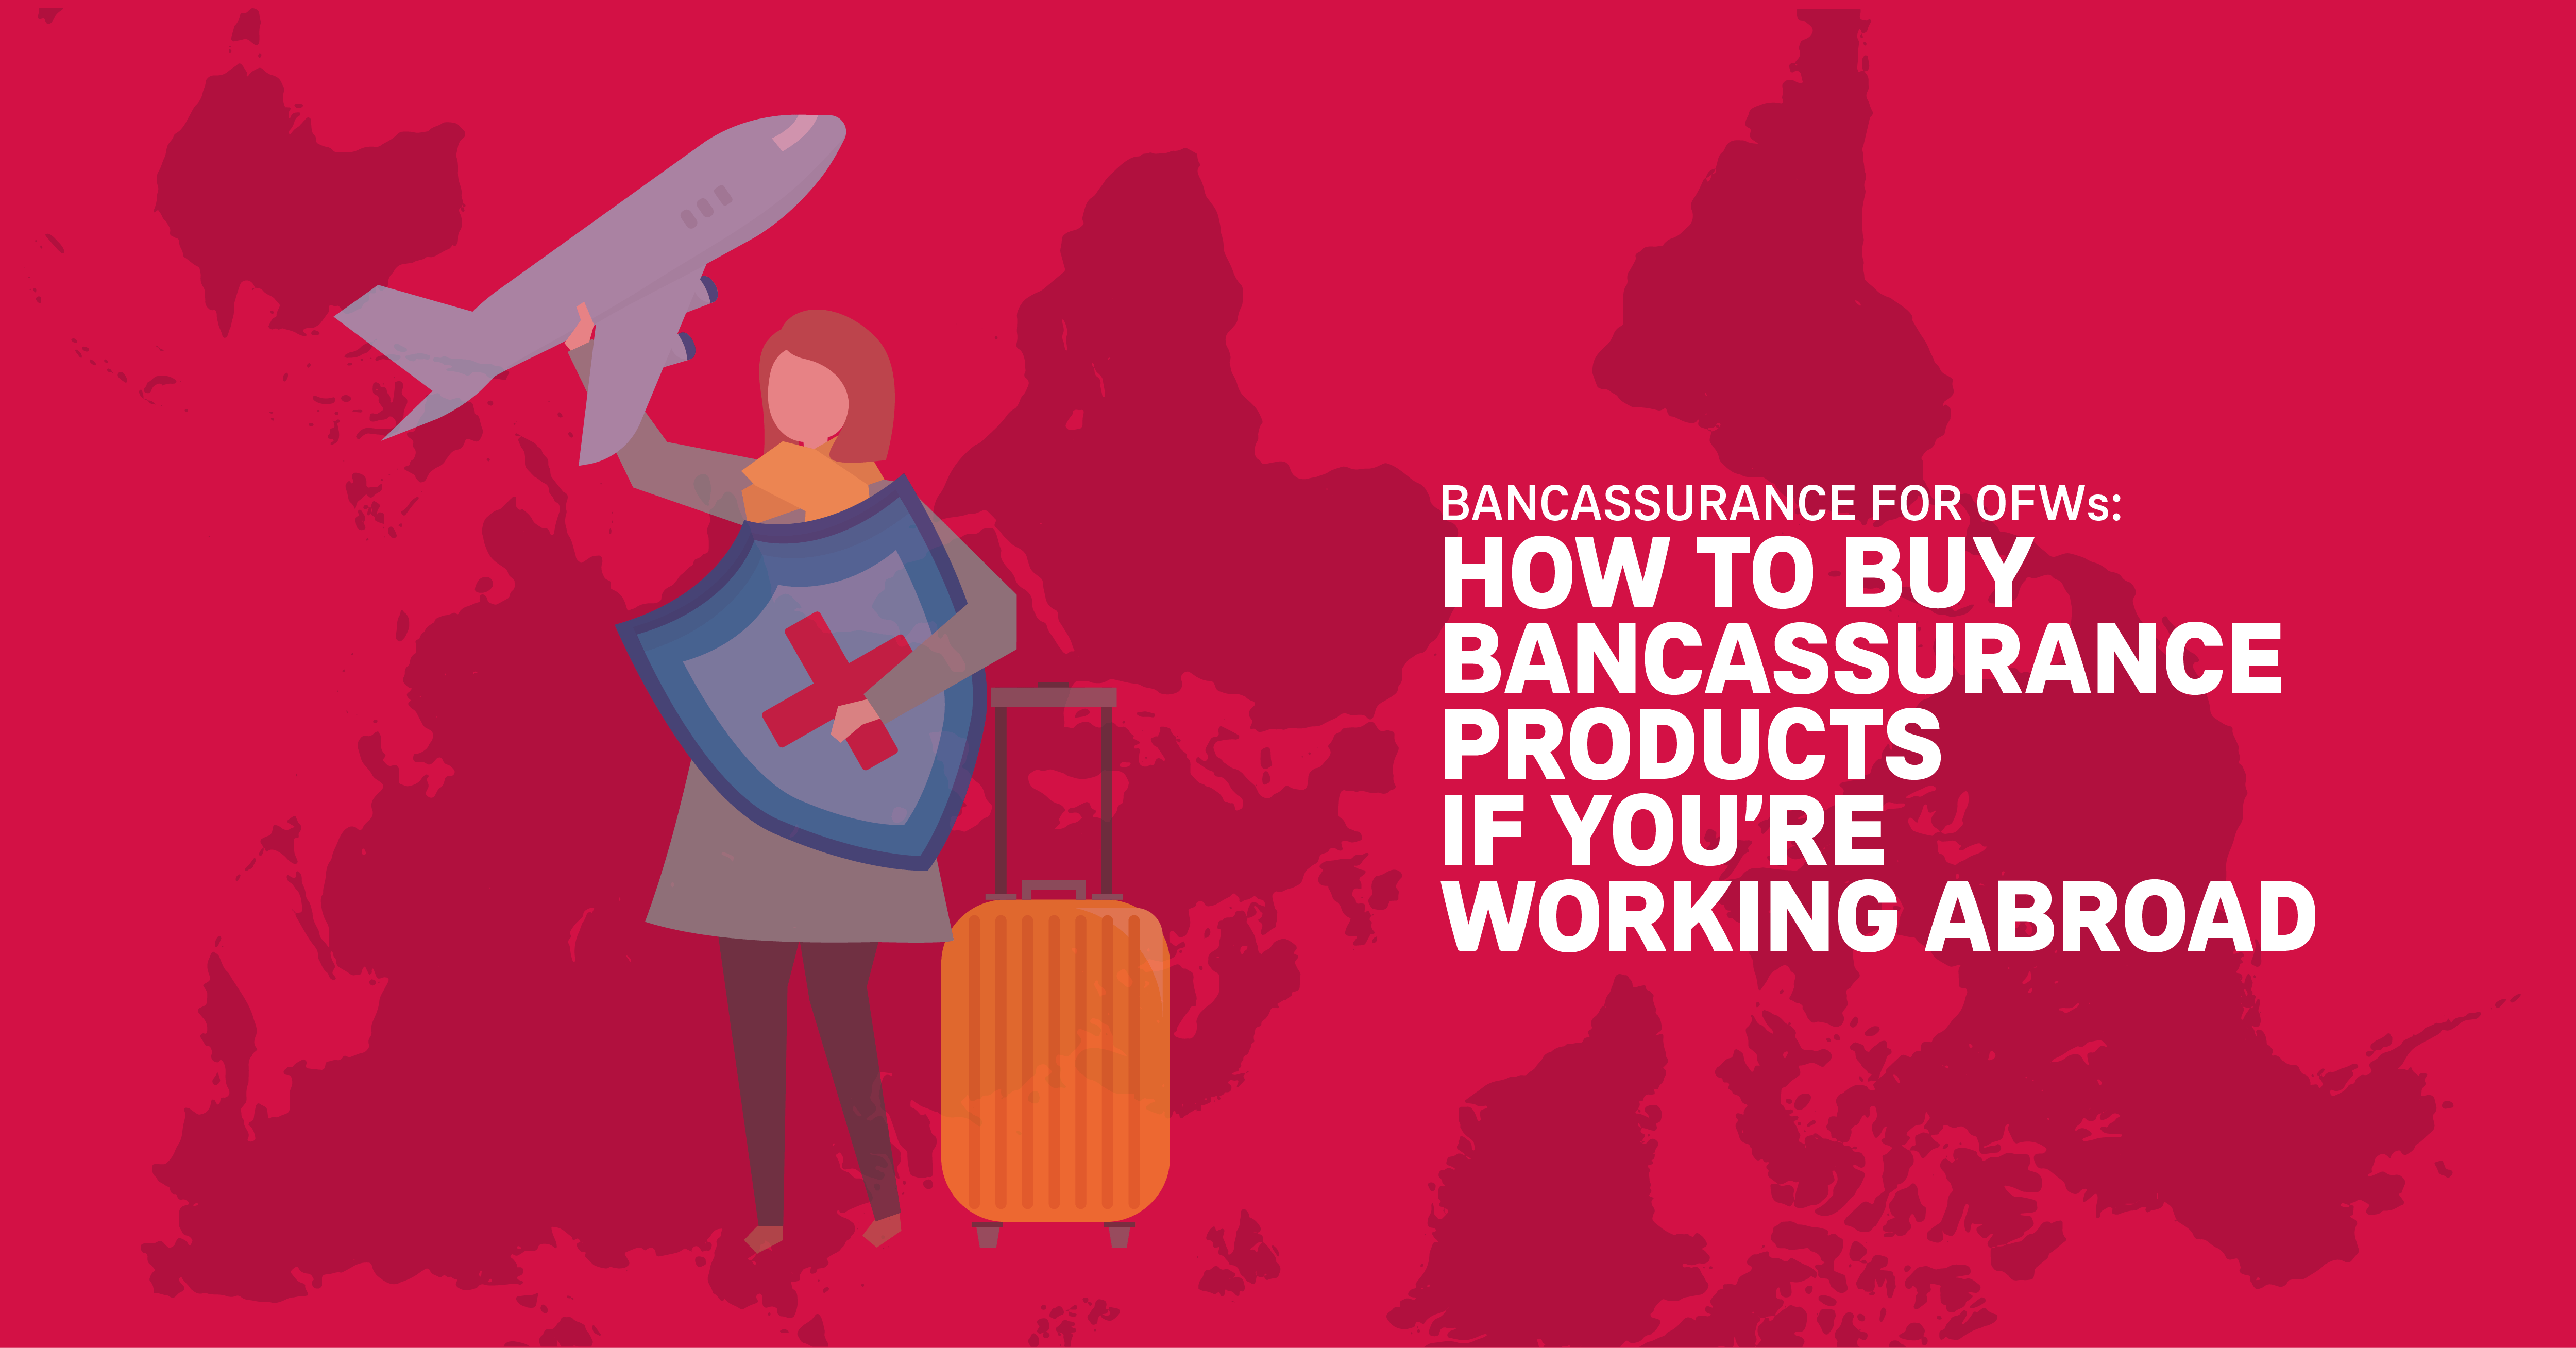 Bancassurance For OFWs: How To Buy Bancassurance Products If You’re Working Abroad